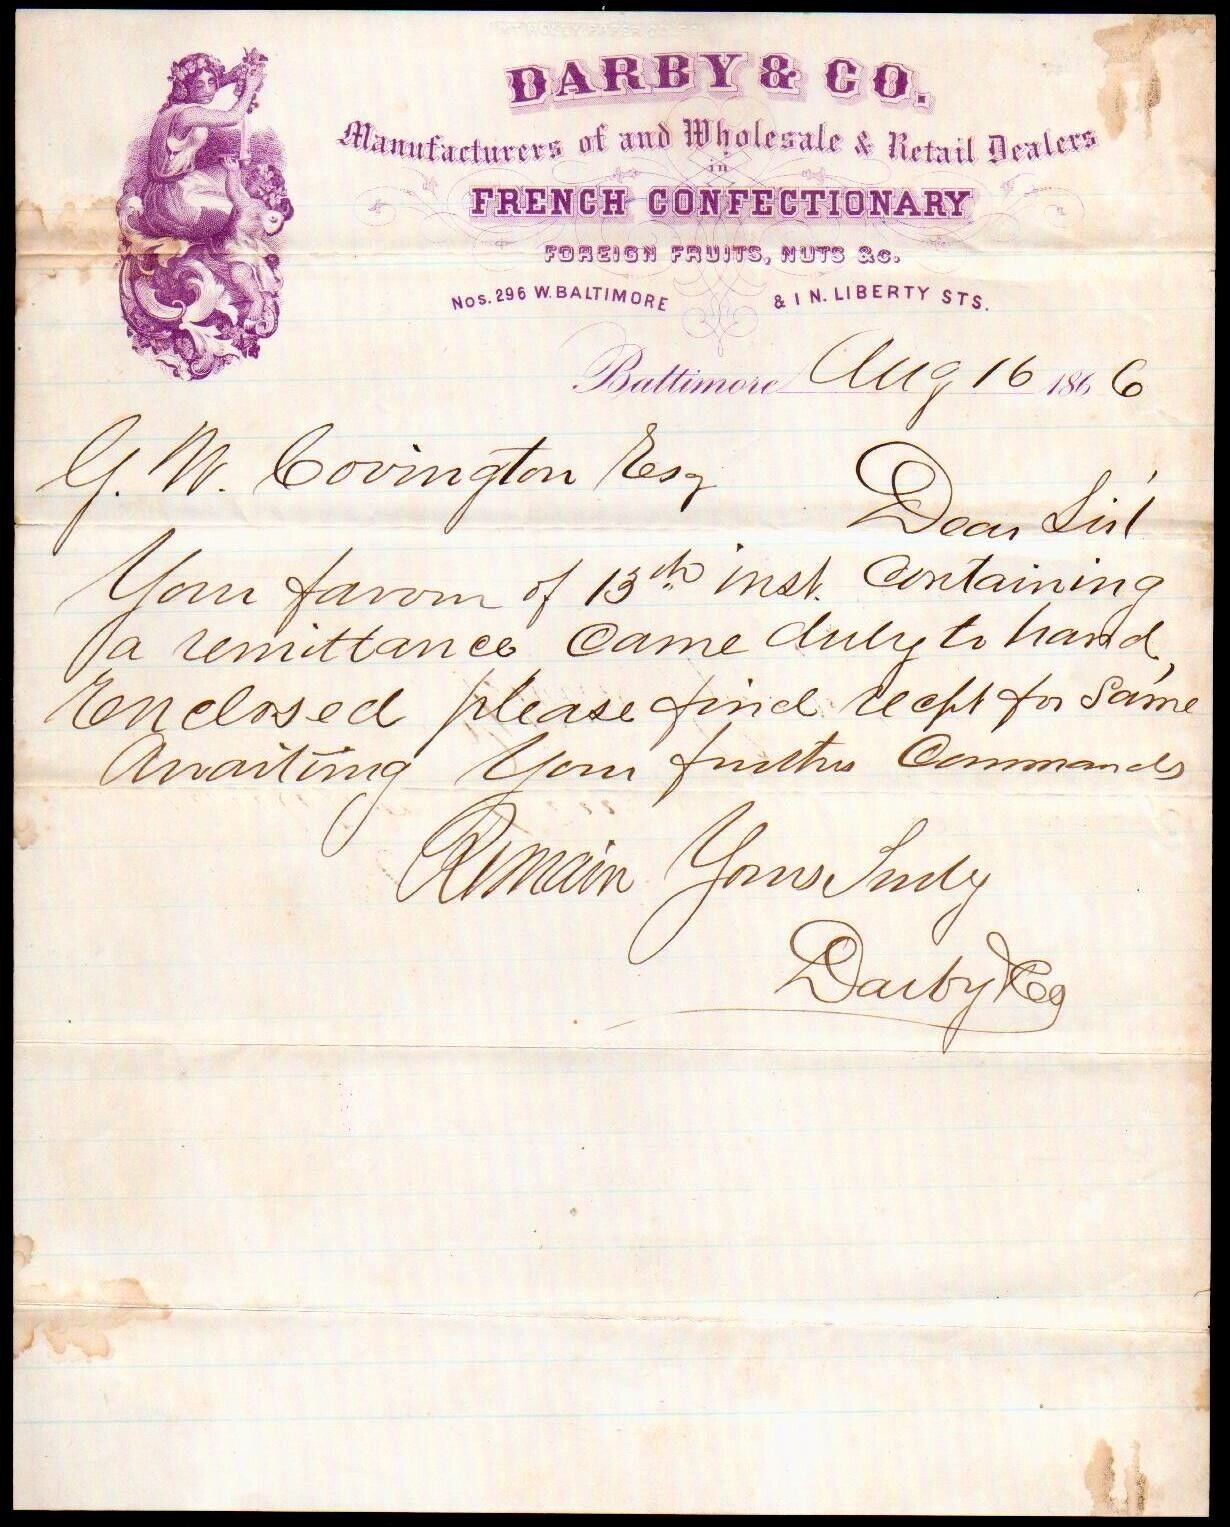 1866 Baltimore Md - Darby & Co - French Confectionary - Rare Letter Head Bill